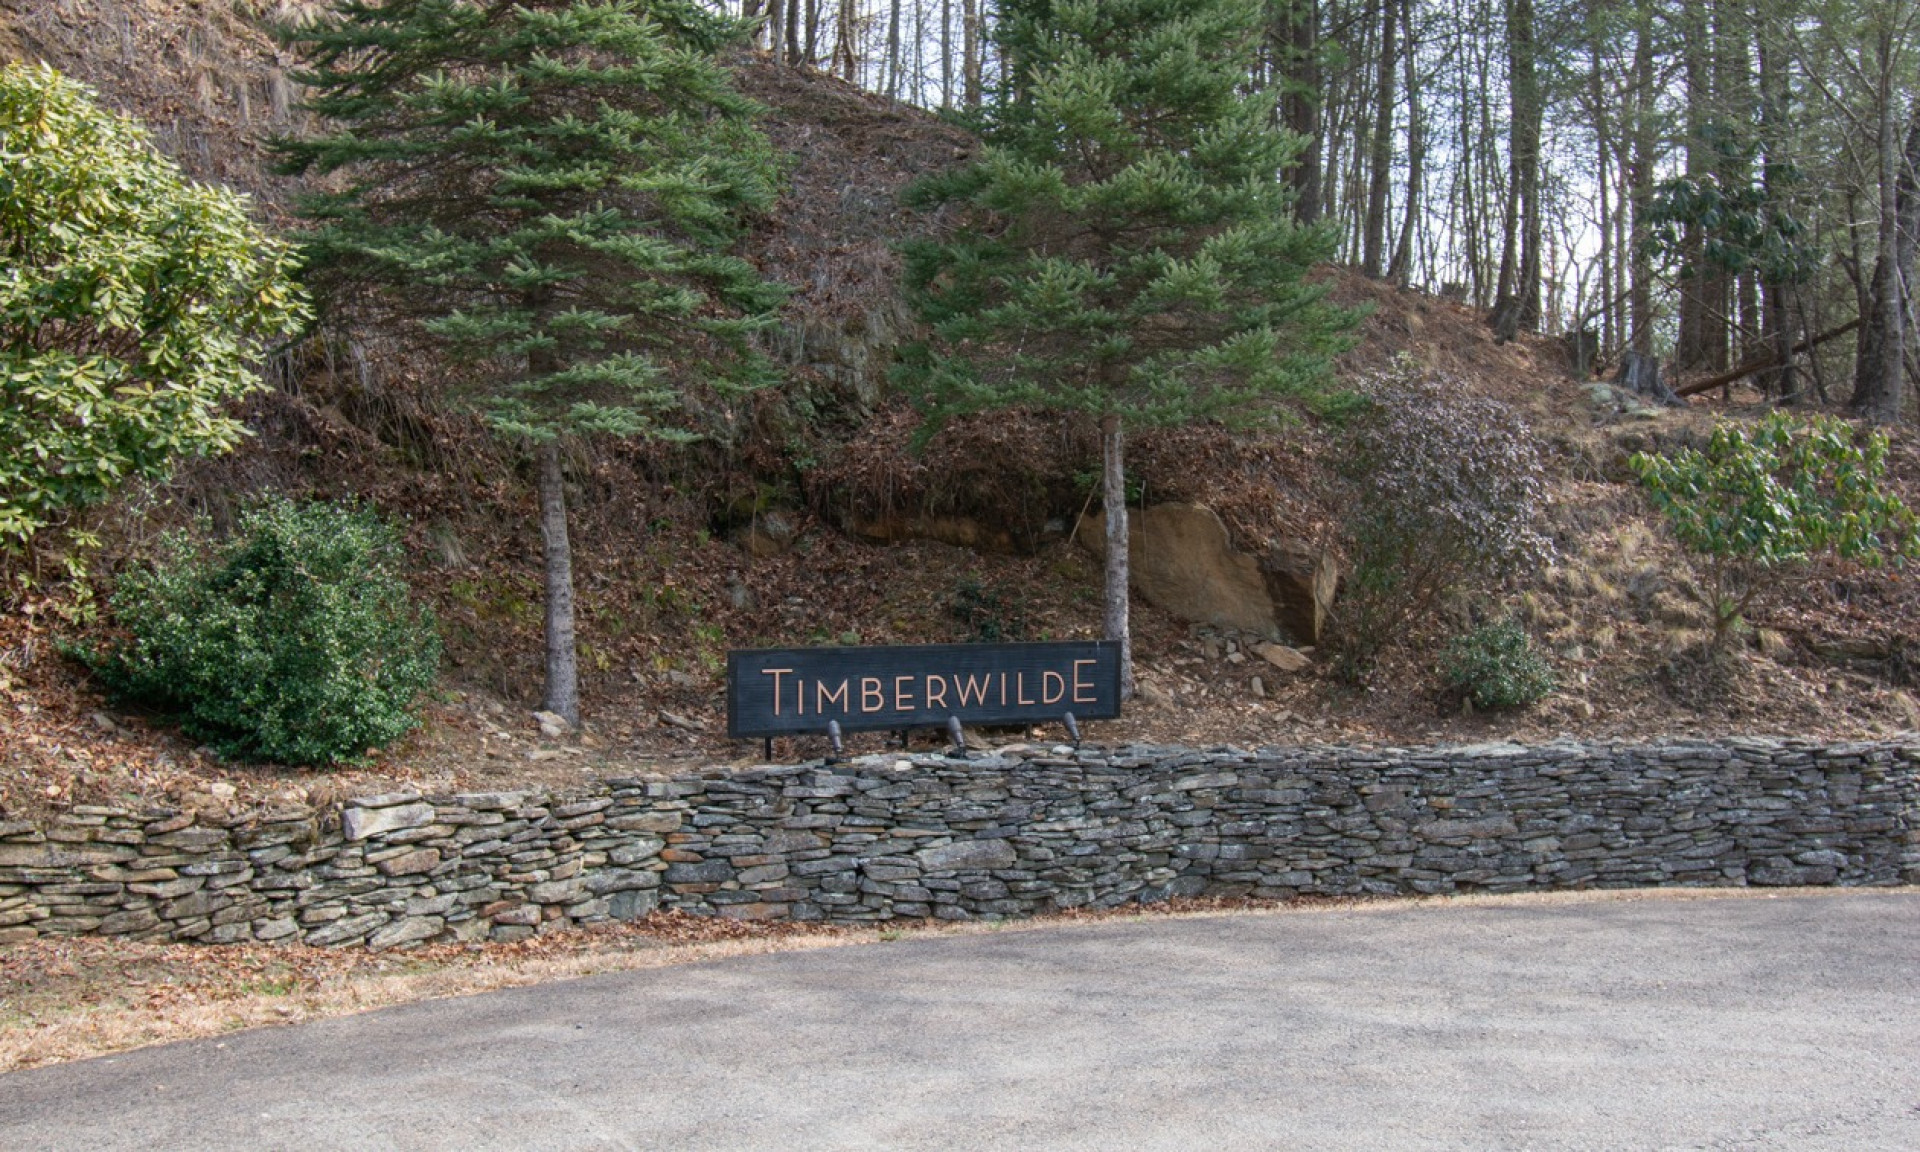 Welcome to Timberwilde, a gated log home mountain community in the Laurel Springs area of Ashe County in the NC Mountains.